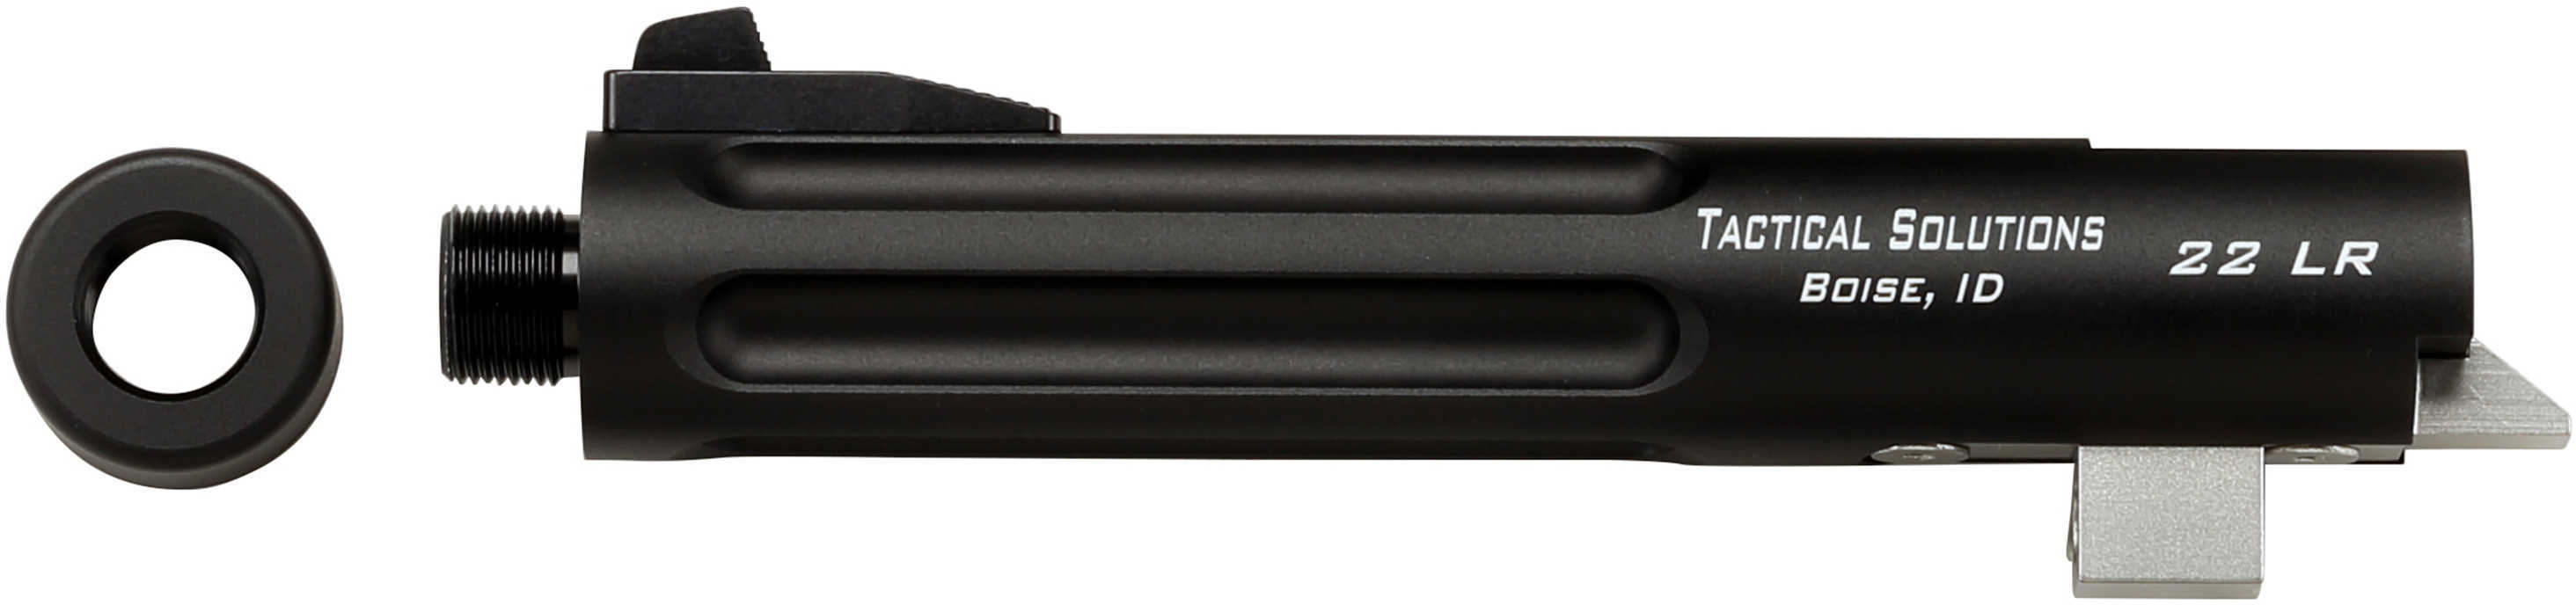 Tactical Solutions TL55TERF02 Trail-Lite 22 Long Rifle 5.5" Blk